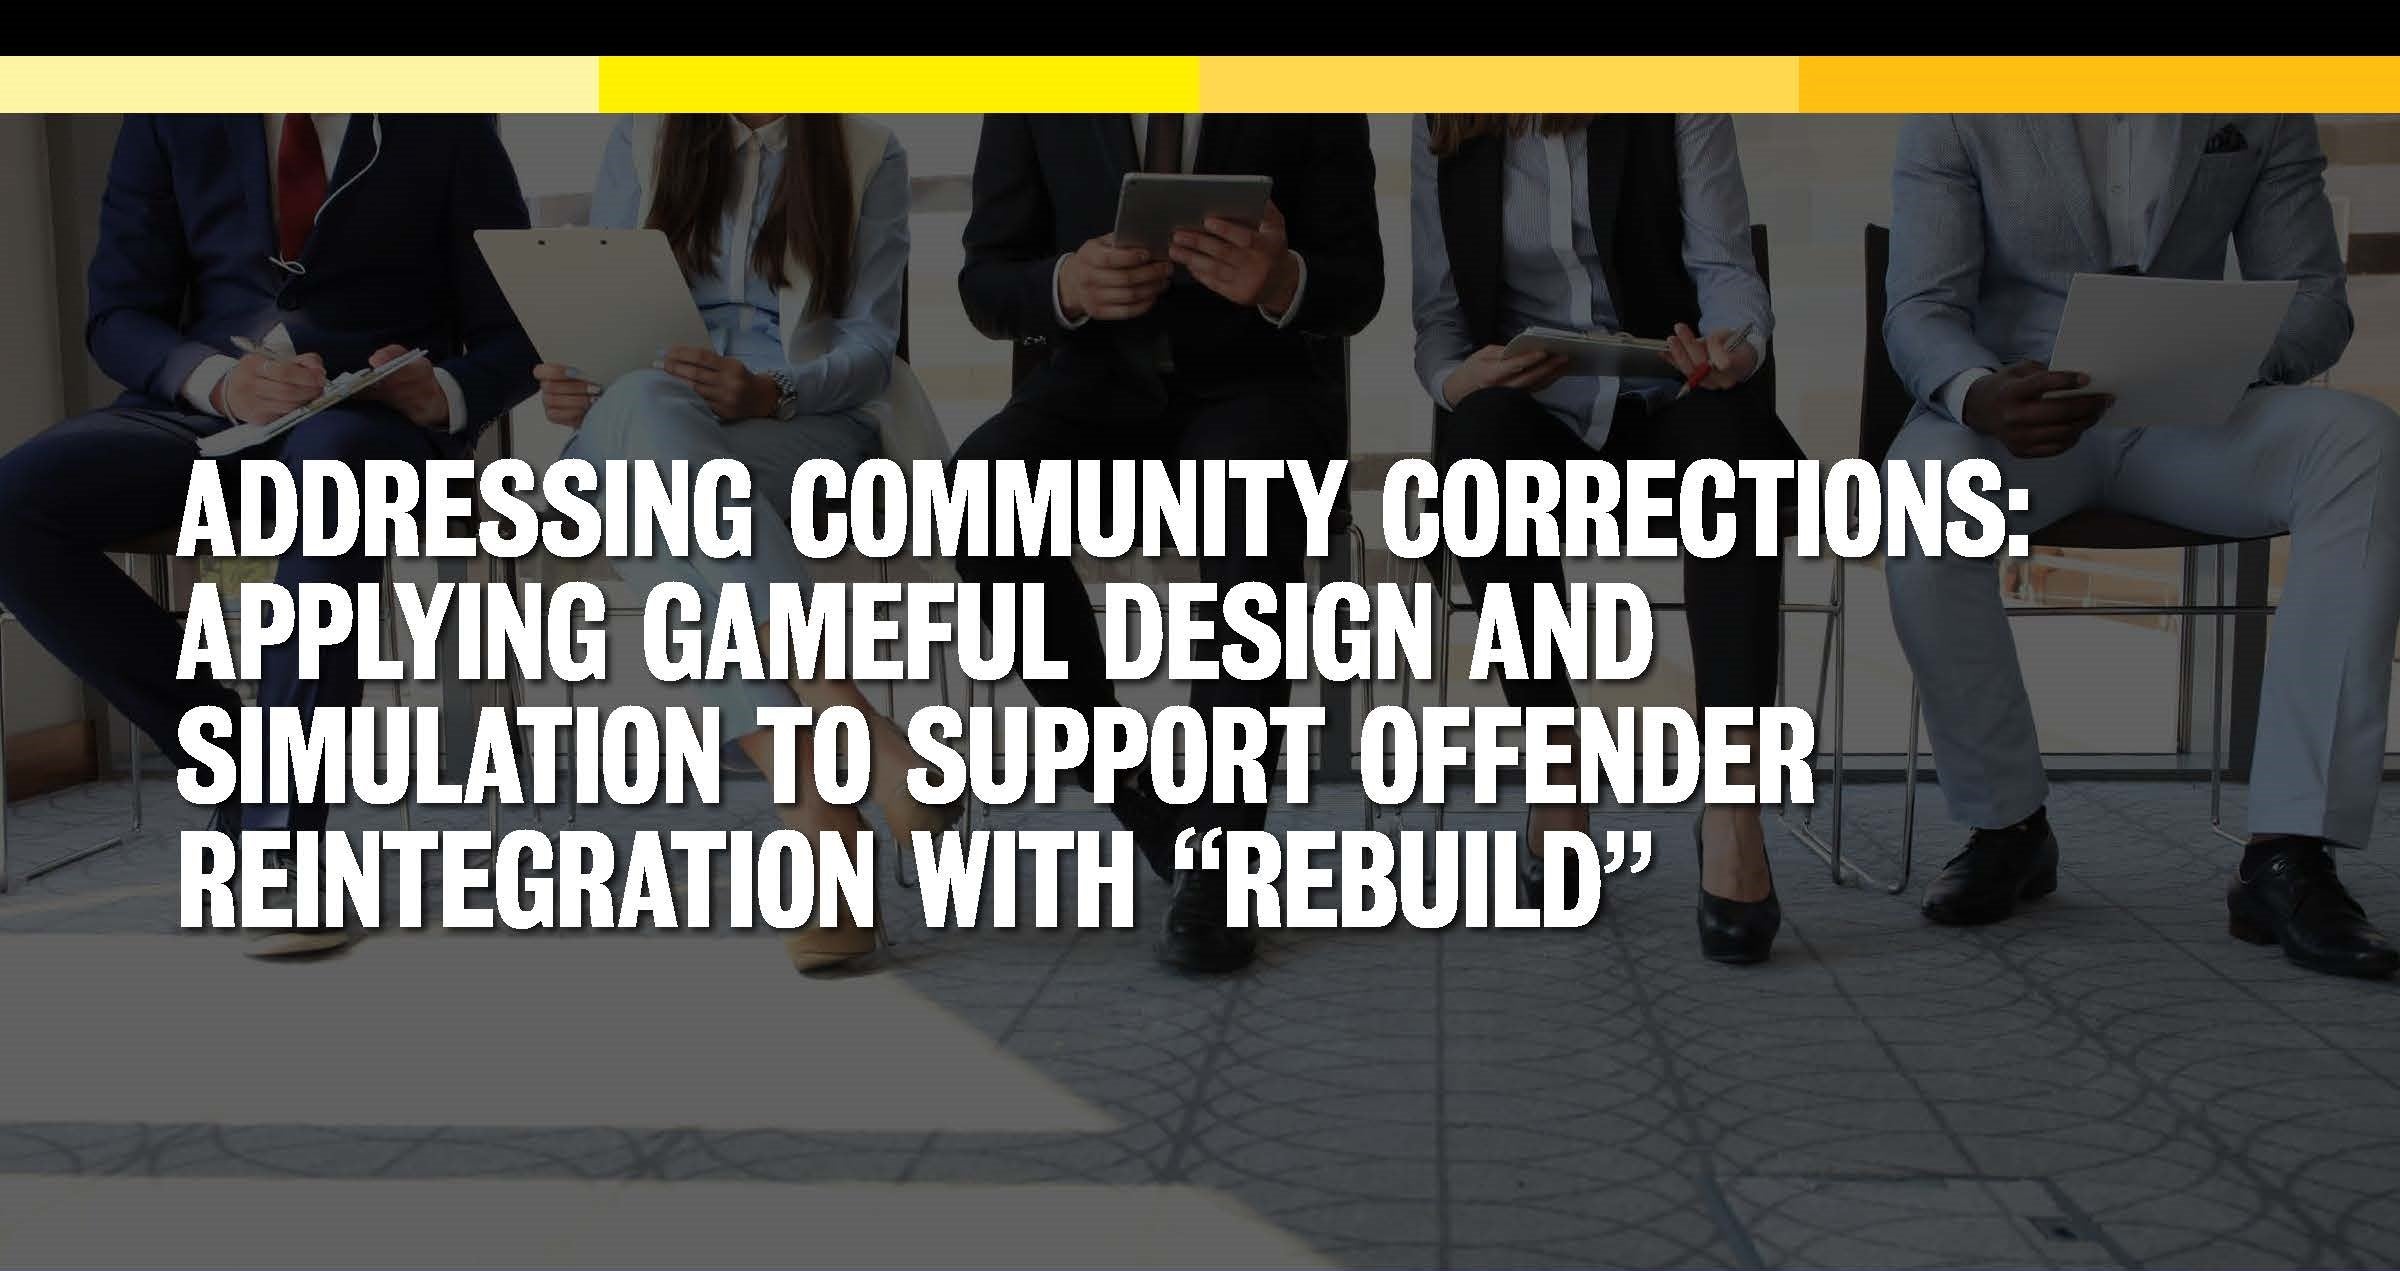 Addressing Community Corrections: Applying Gameful Design and Simulation to Support Offender Reintegration with "Rebuild"; people sitting in a row